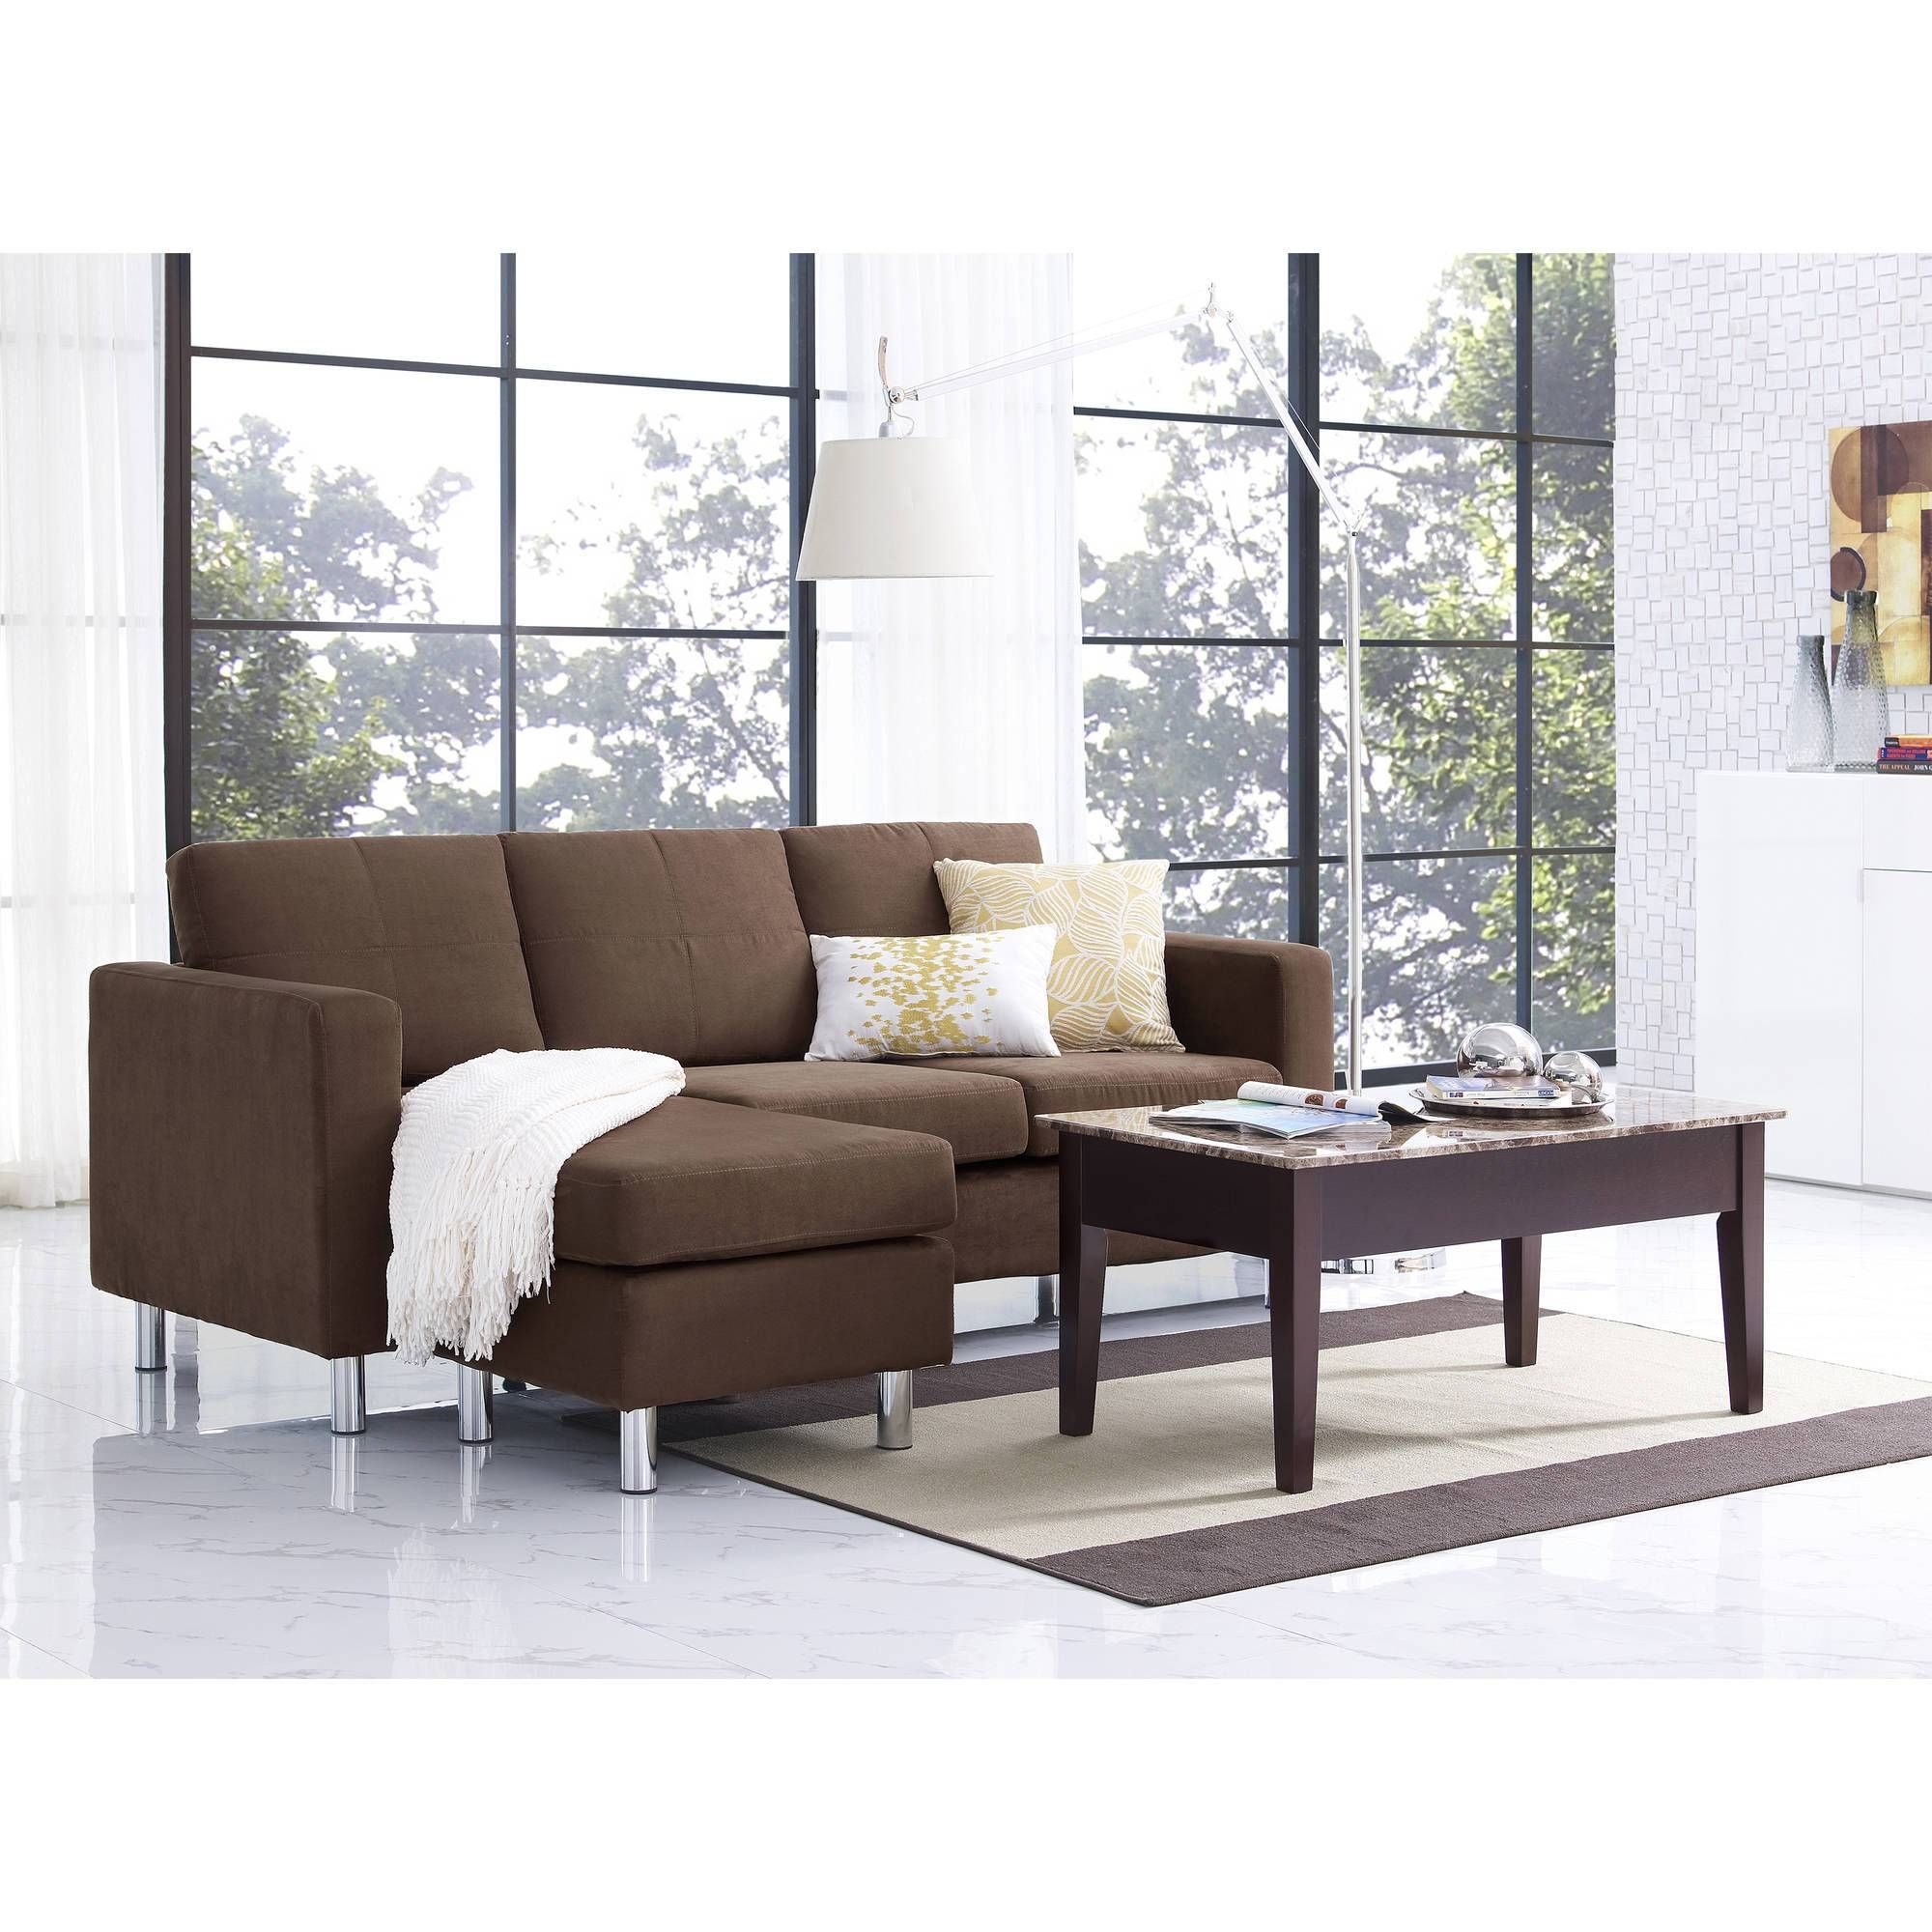 Dorel Living Small Spaces Configurable Sectional Sofa, Multiple Within Sectional Sofas In Small Spaces (View 7 of 25)